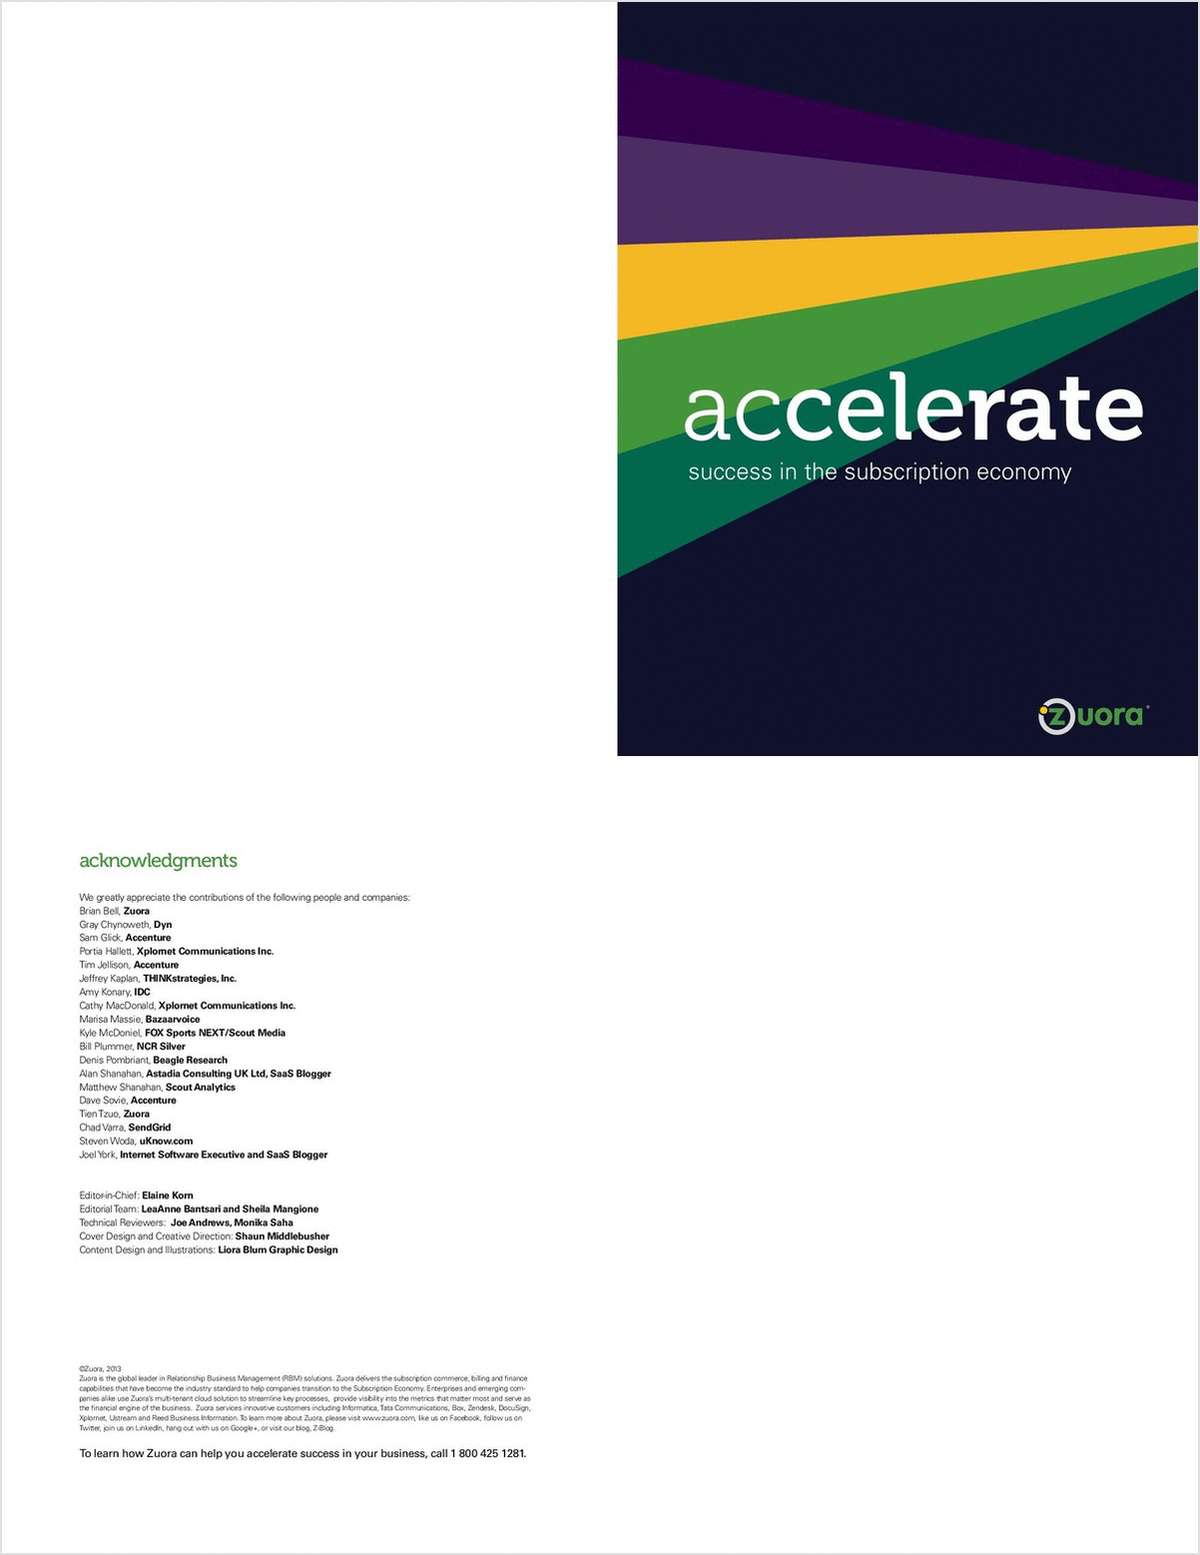 Accelerate Success in the Subscription Economy